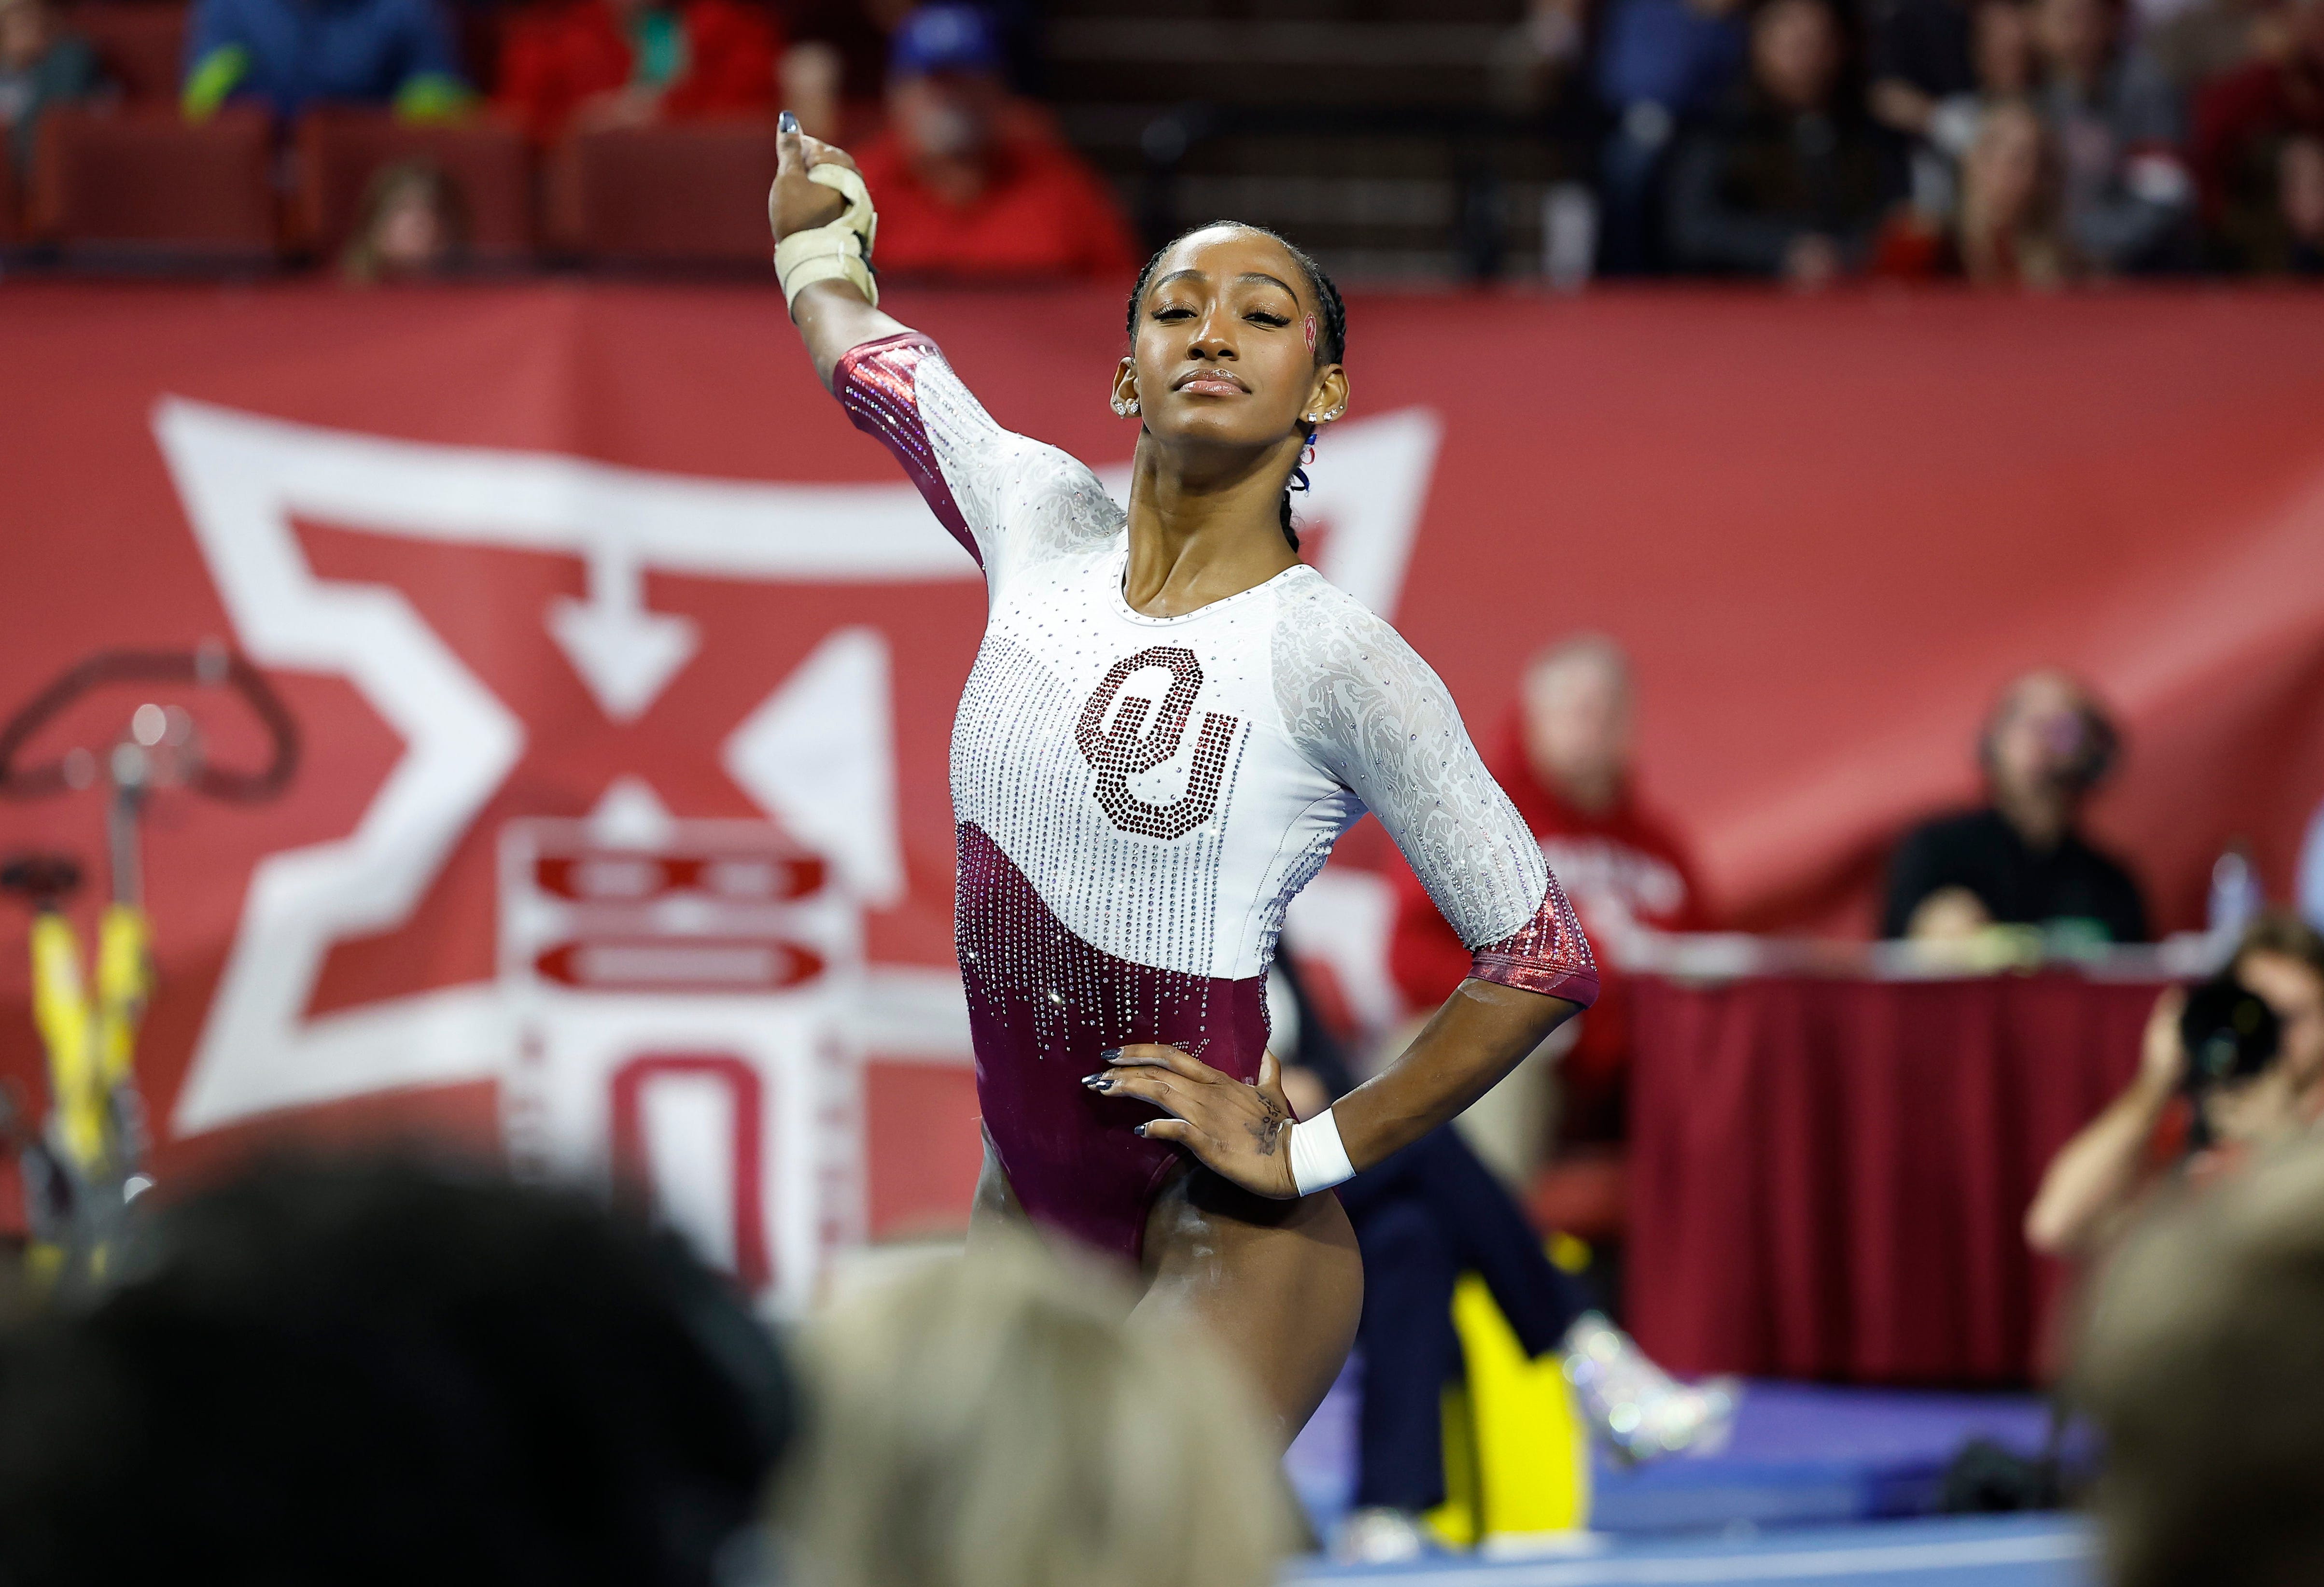 How to Watch Oklahoma at Denver in Women’s Gymnastics: Stream Live, TV